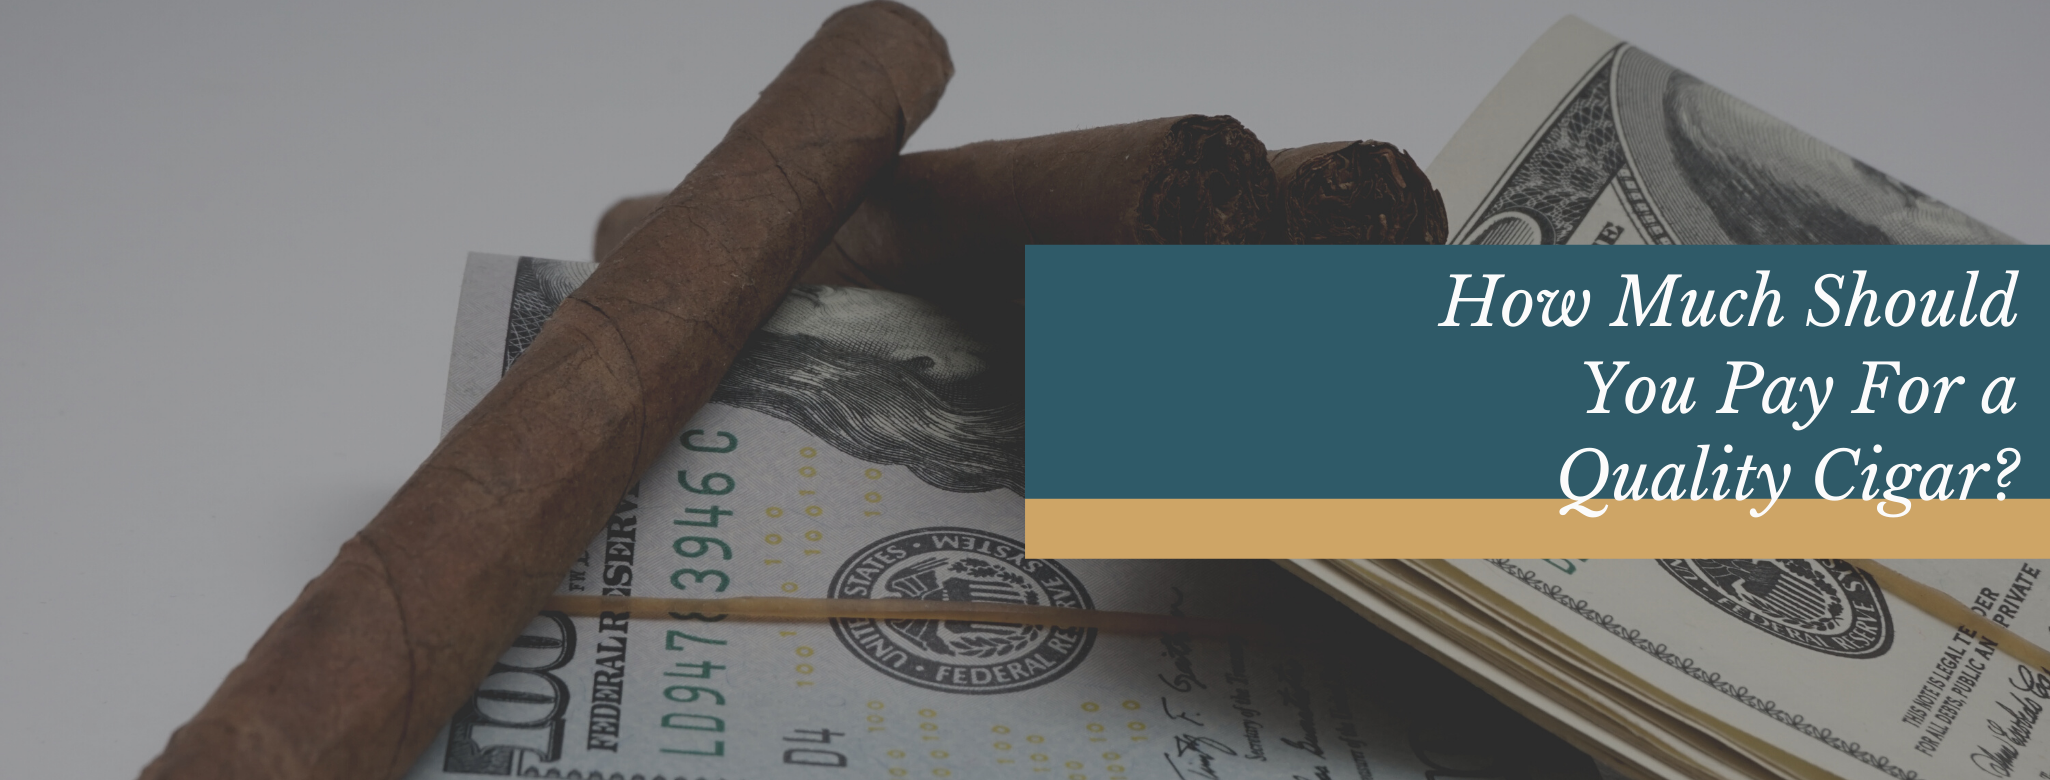 Reads: How much should you pay for a quality cigar?